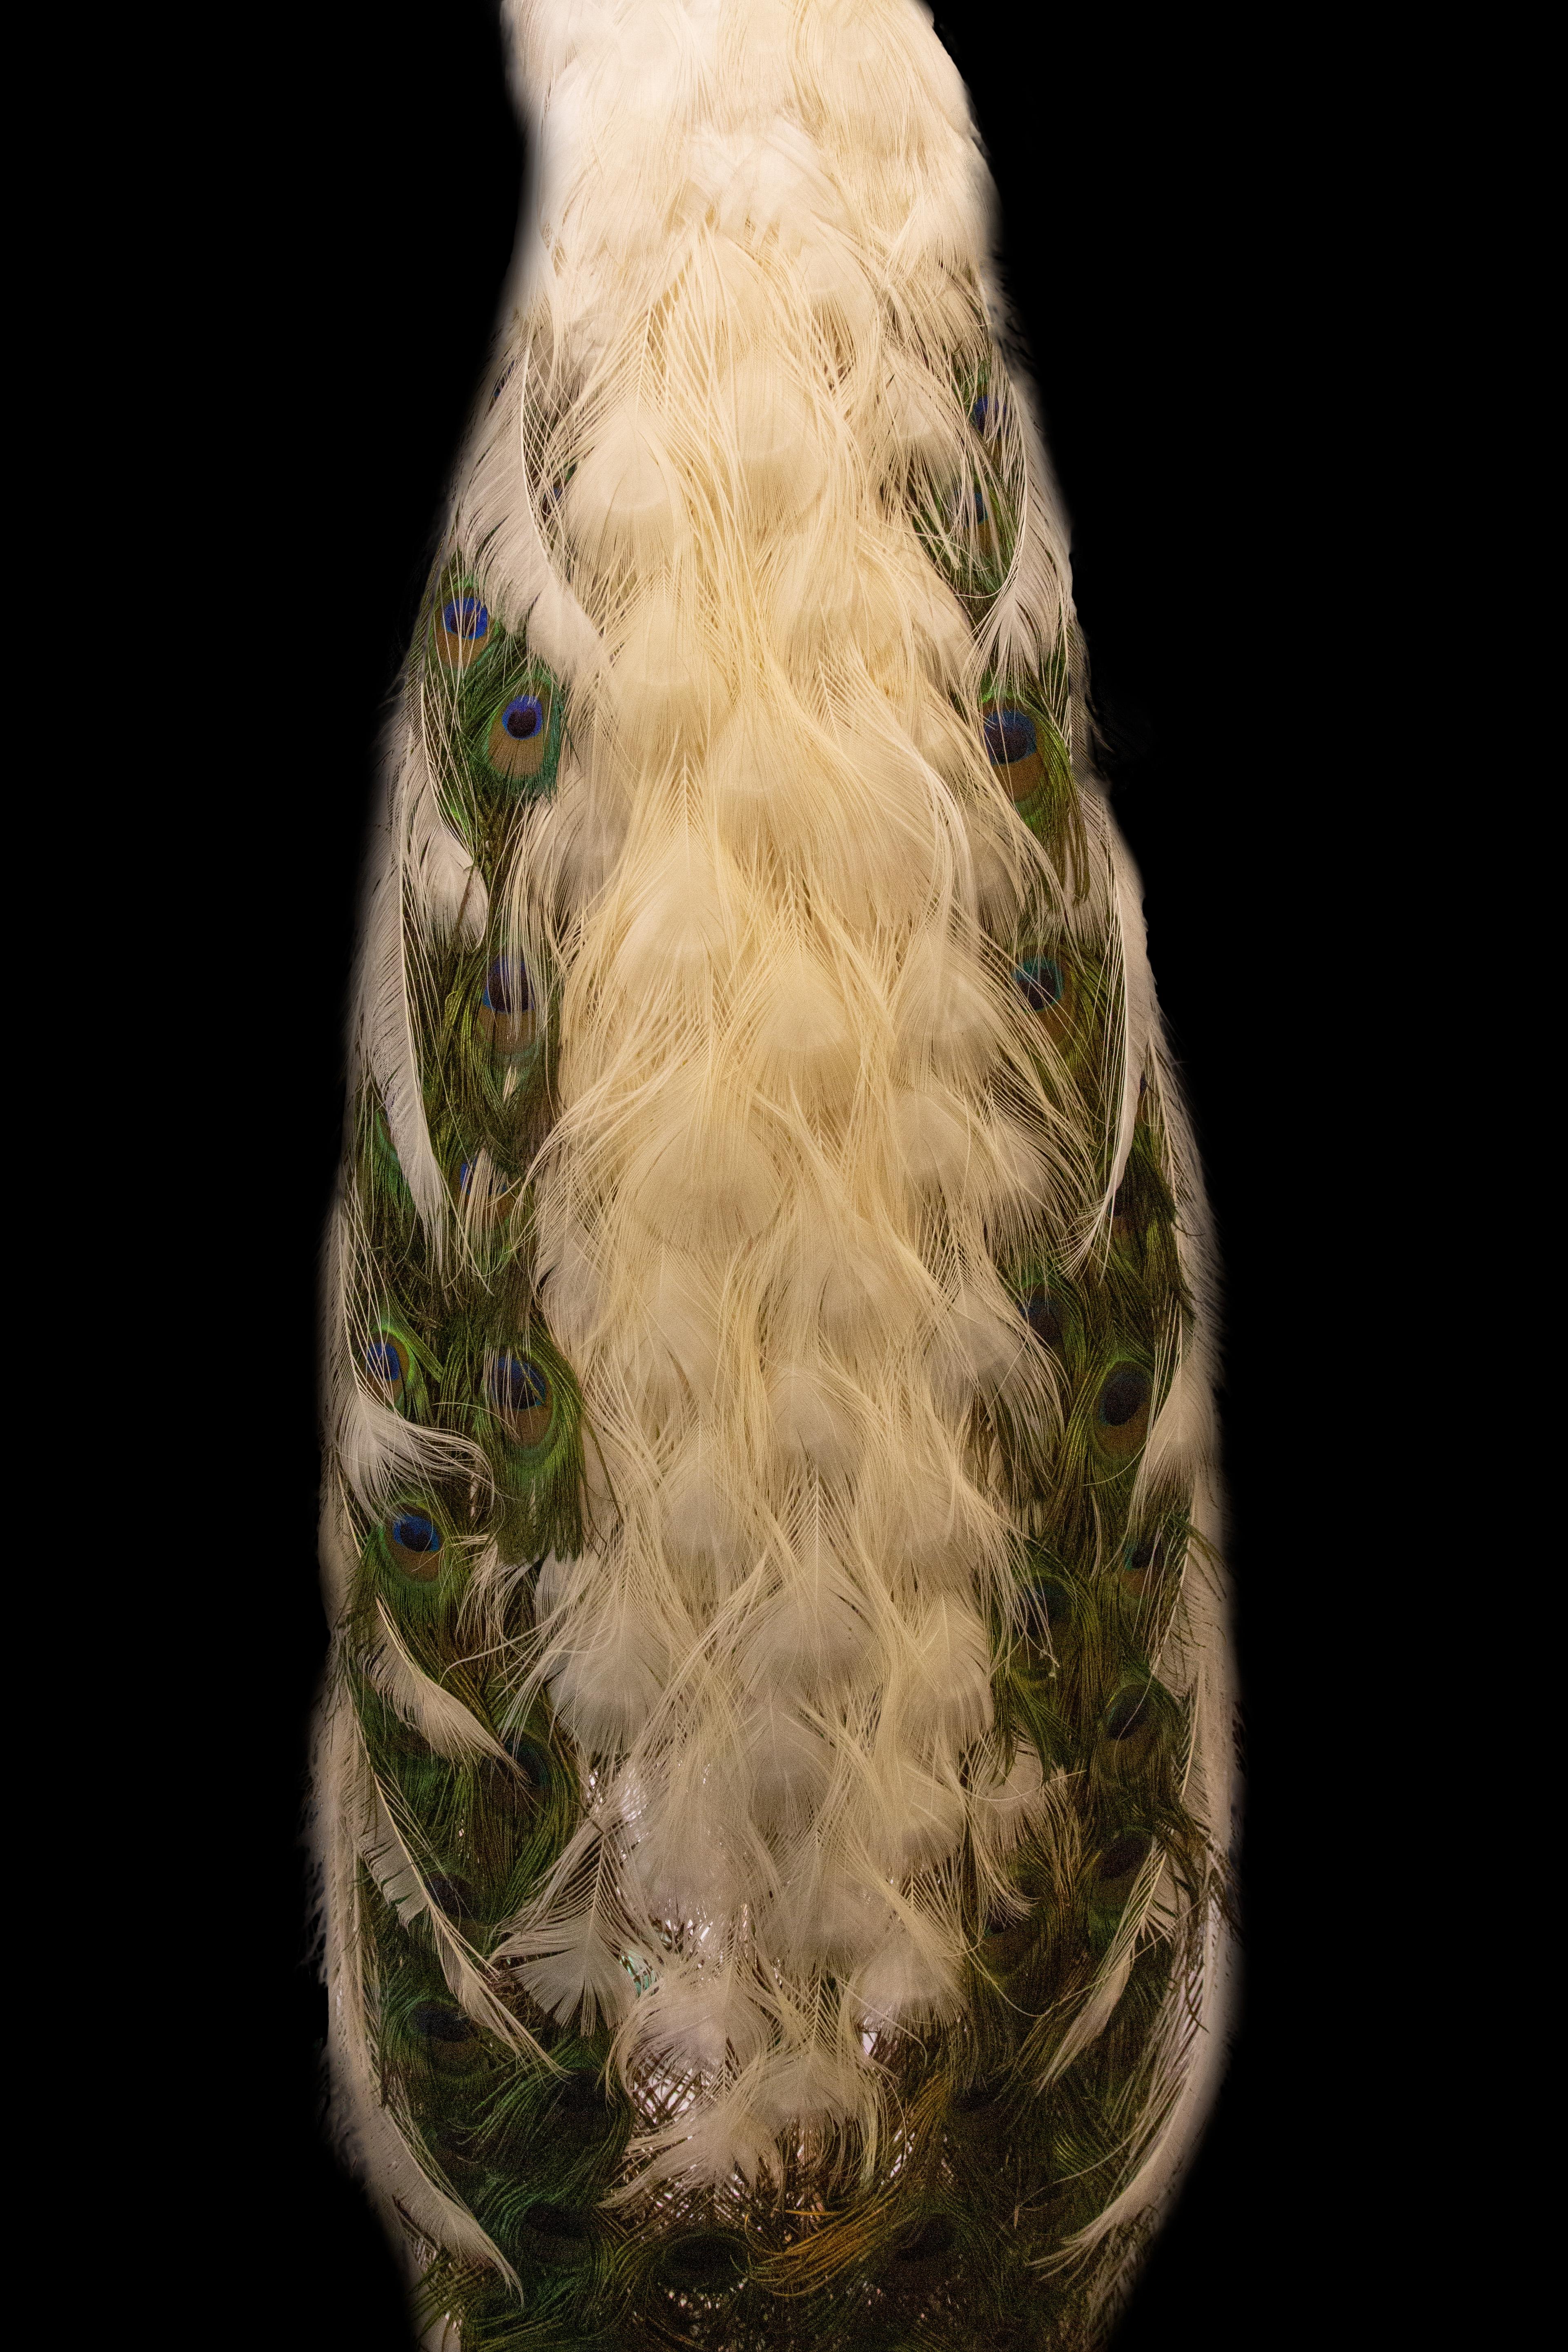 American Pied Taxidermy Peacock